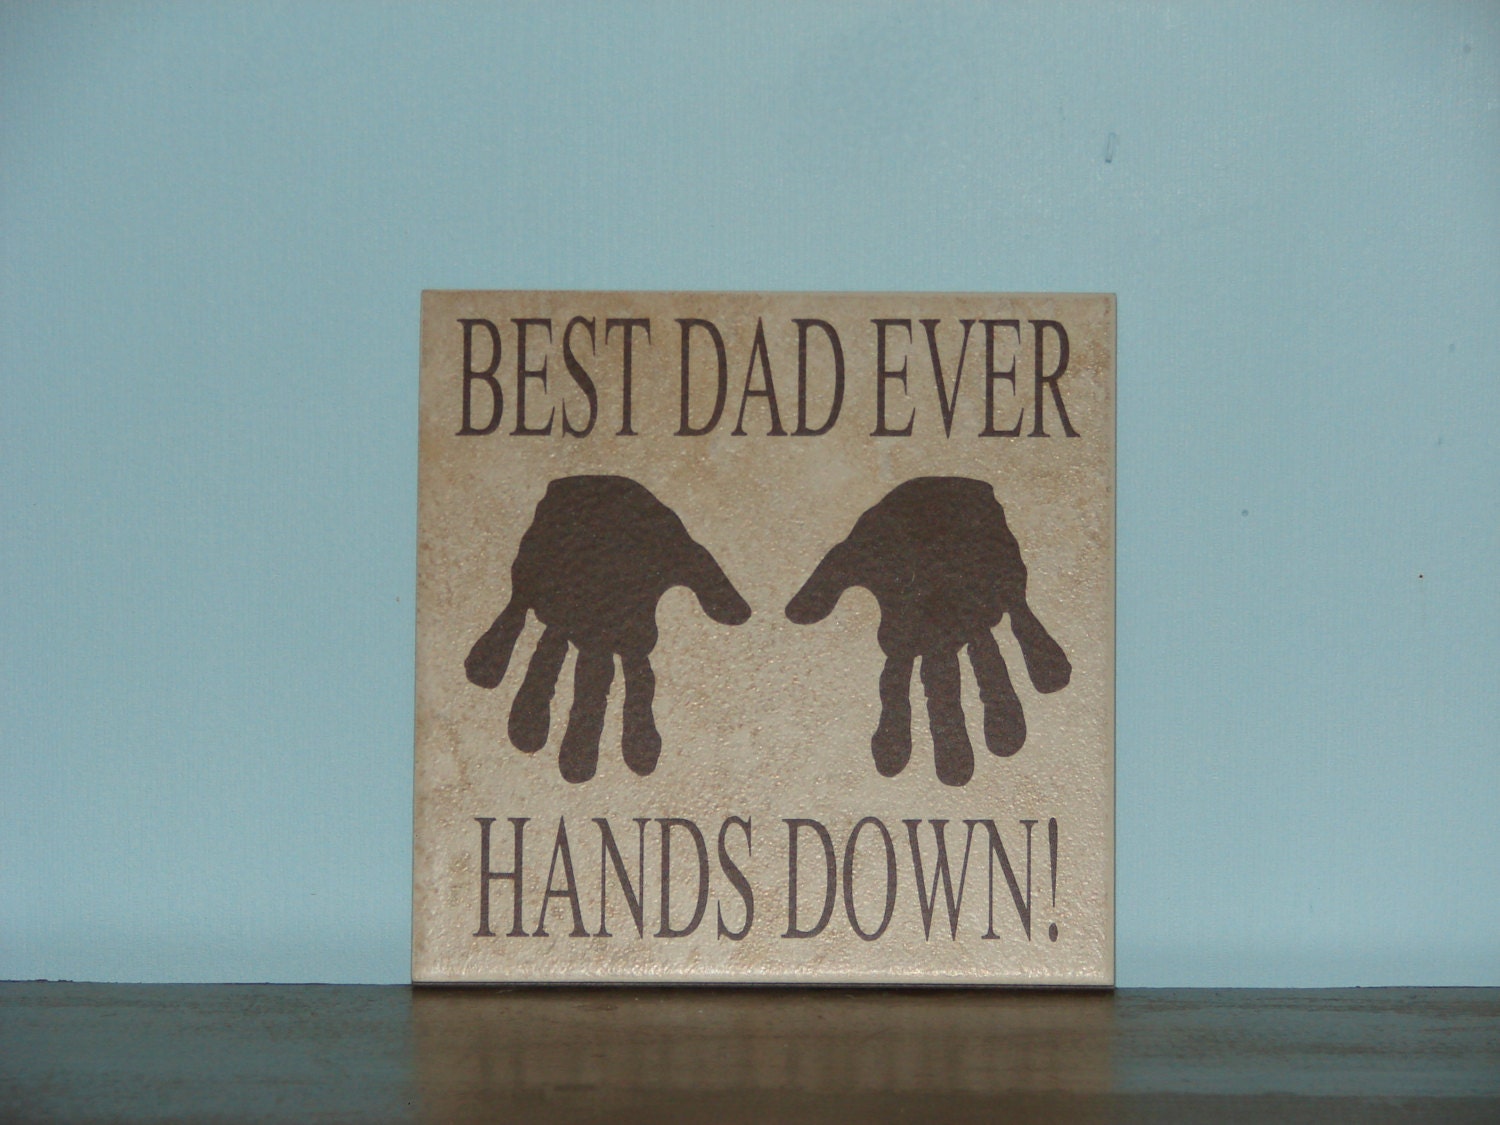 best-dad-ever-hands-down-decorative-tile-with-vinyl-words-and